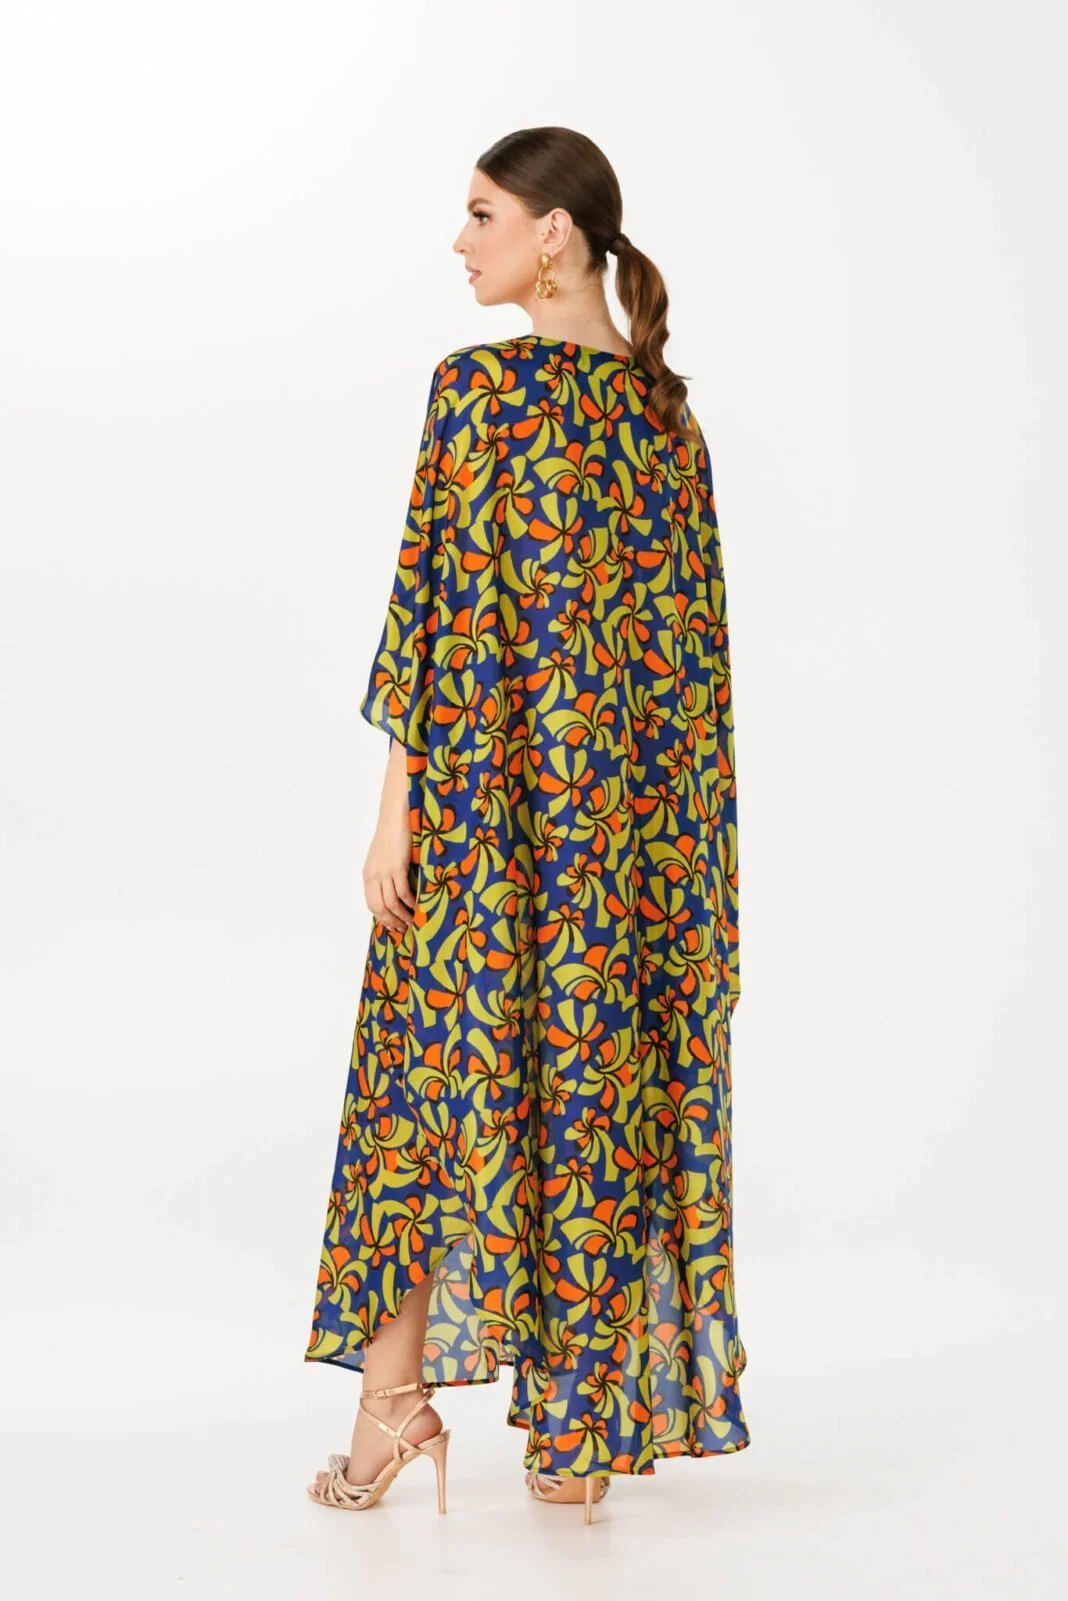 Woman wearing luxurious colorful maxi dress by house of azoiia